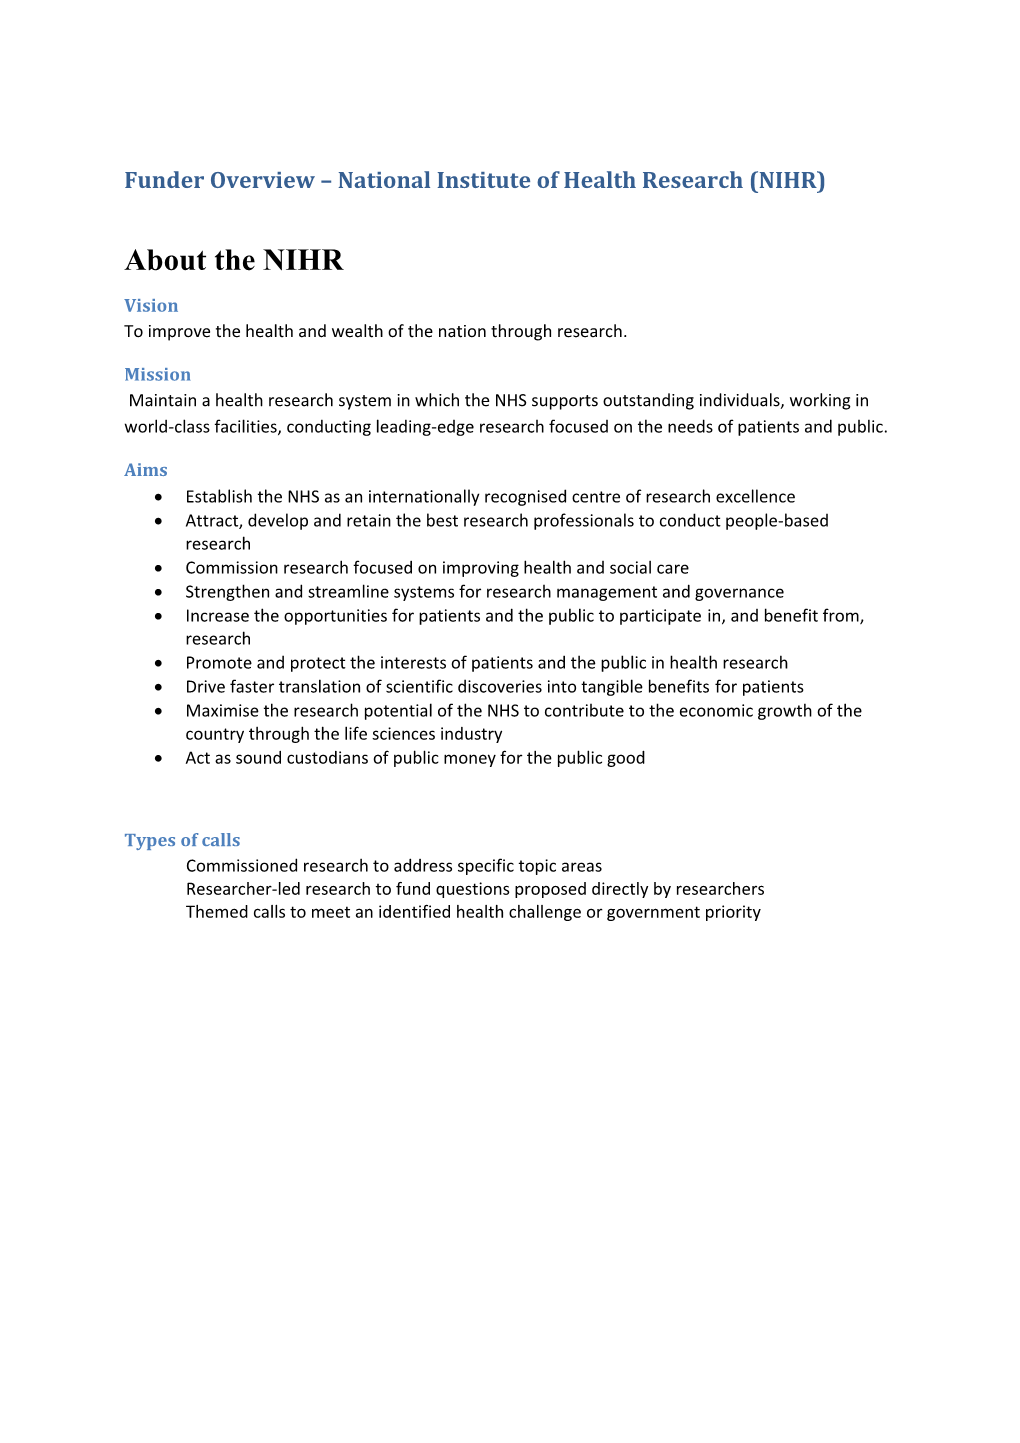 Funder Overview National Institute of Health Research (NIHR)